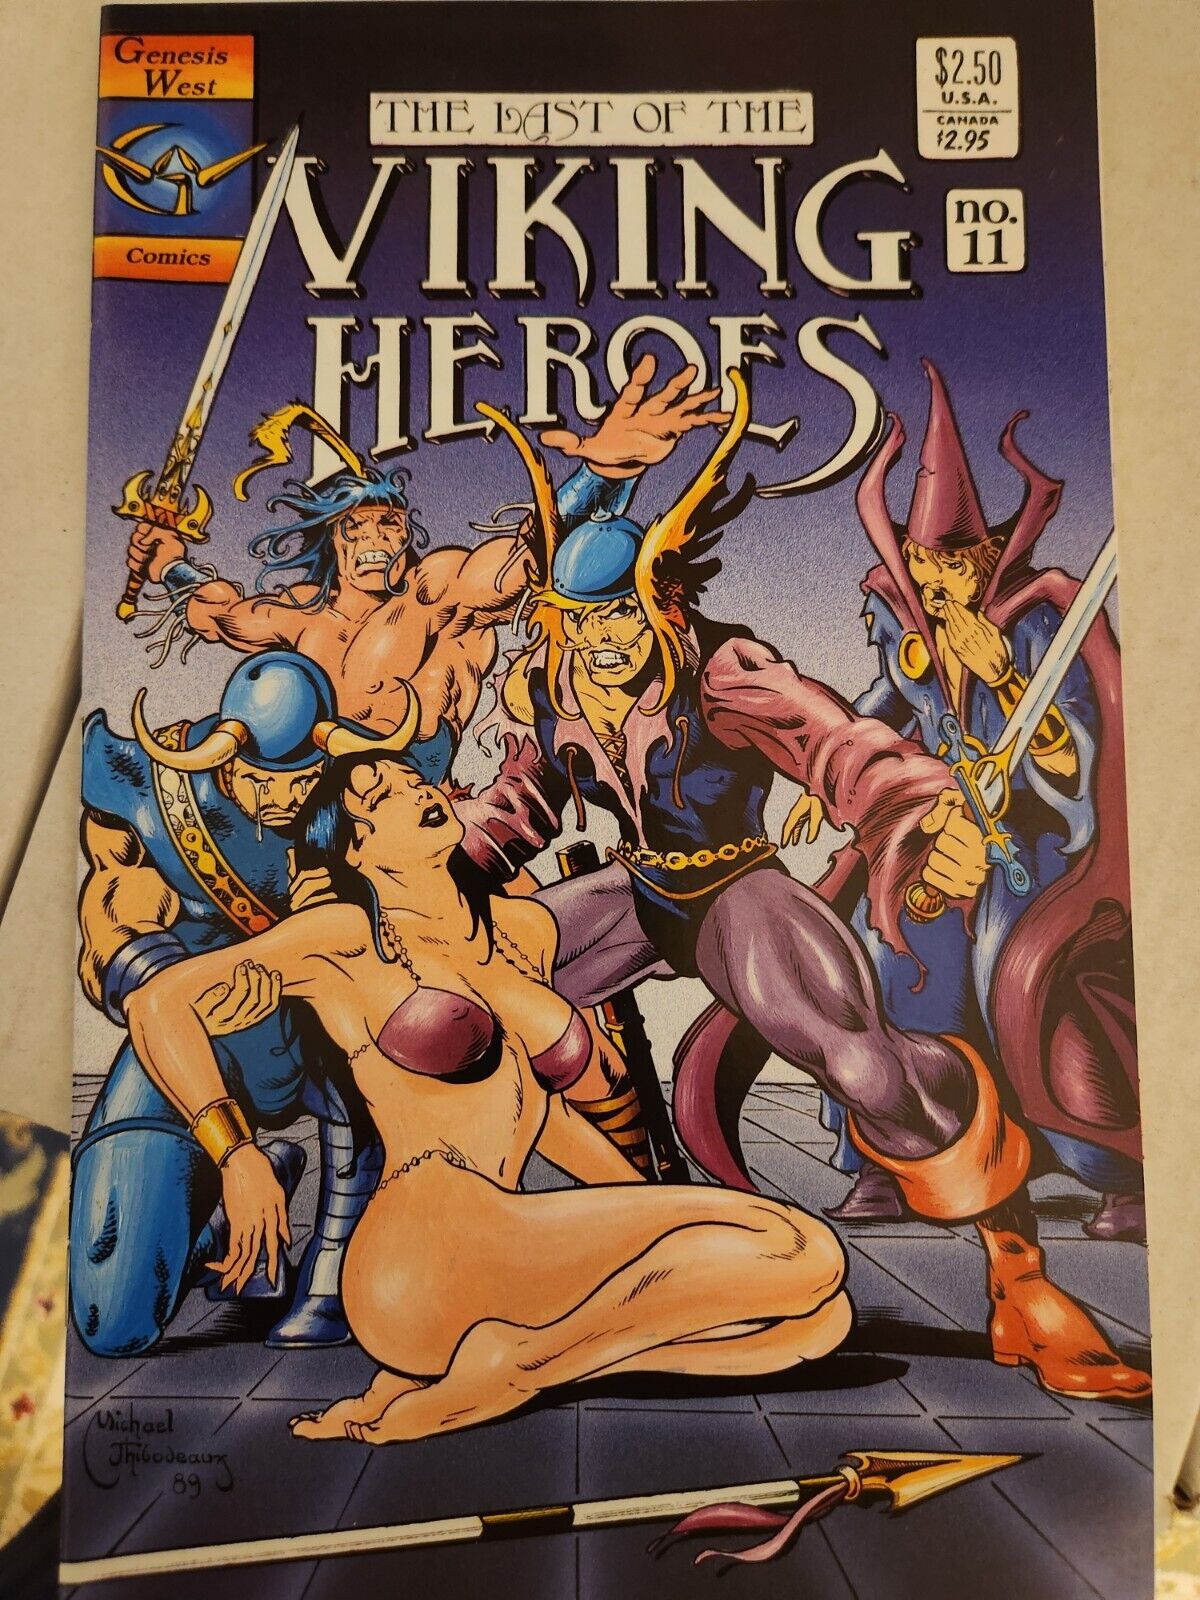 The Last of the Viking Heroes #11 Michael Thibodeaux cover 1992